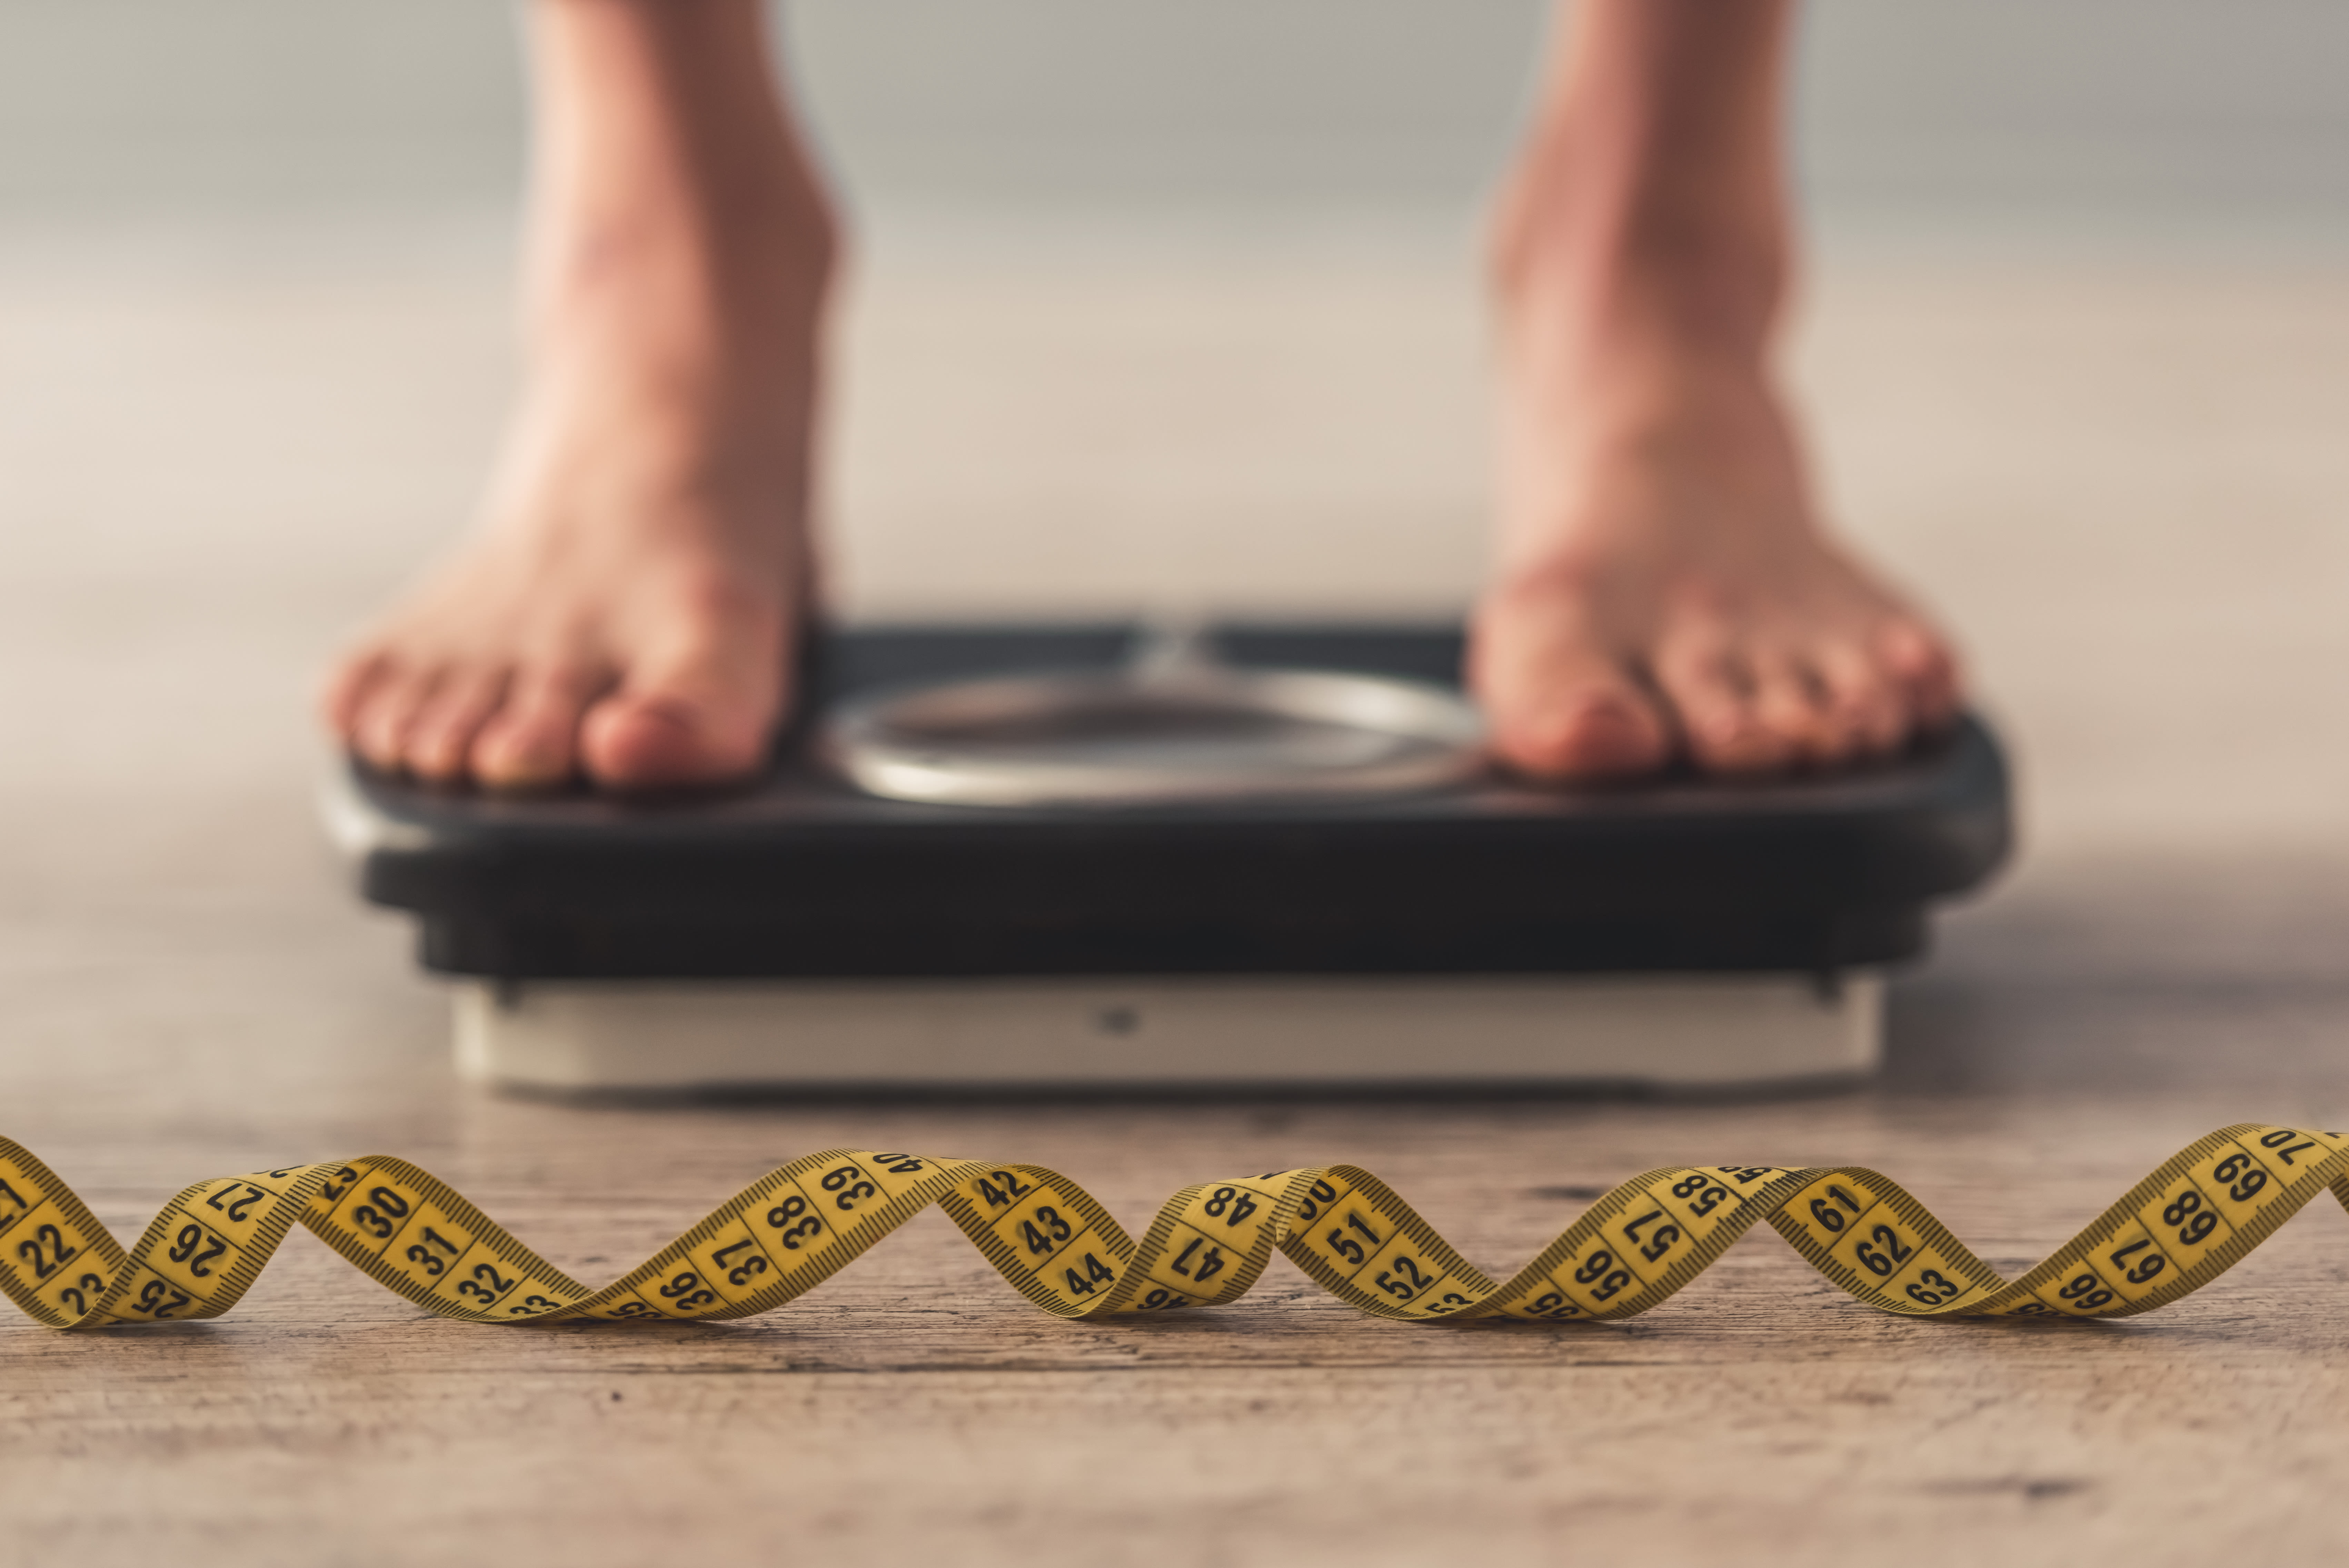 Can Pfizer Challenge Lilly and Novo Nordisk in the Obesity Market?